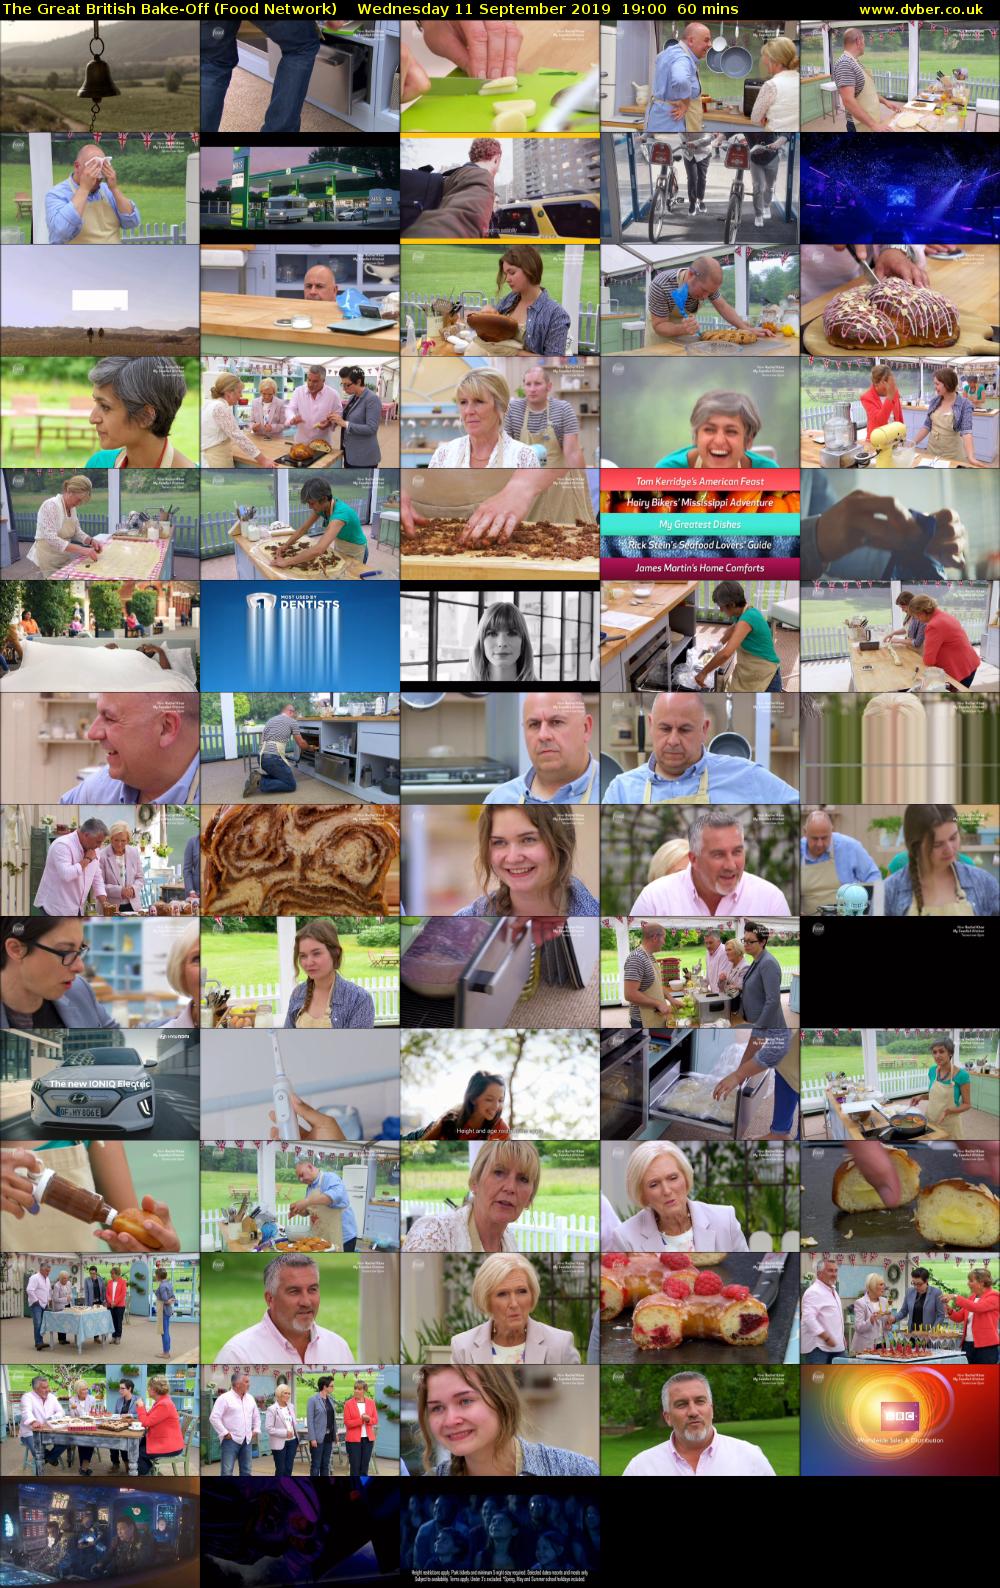 The Great British Bake-Off (Food Network) Wednesday 11 September 2019 19:00 - 20:00